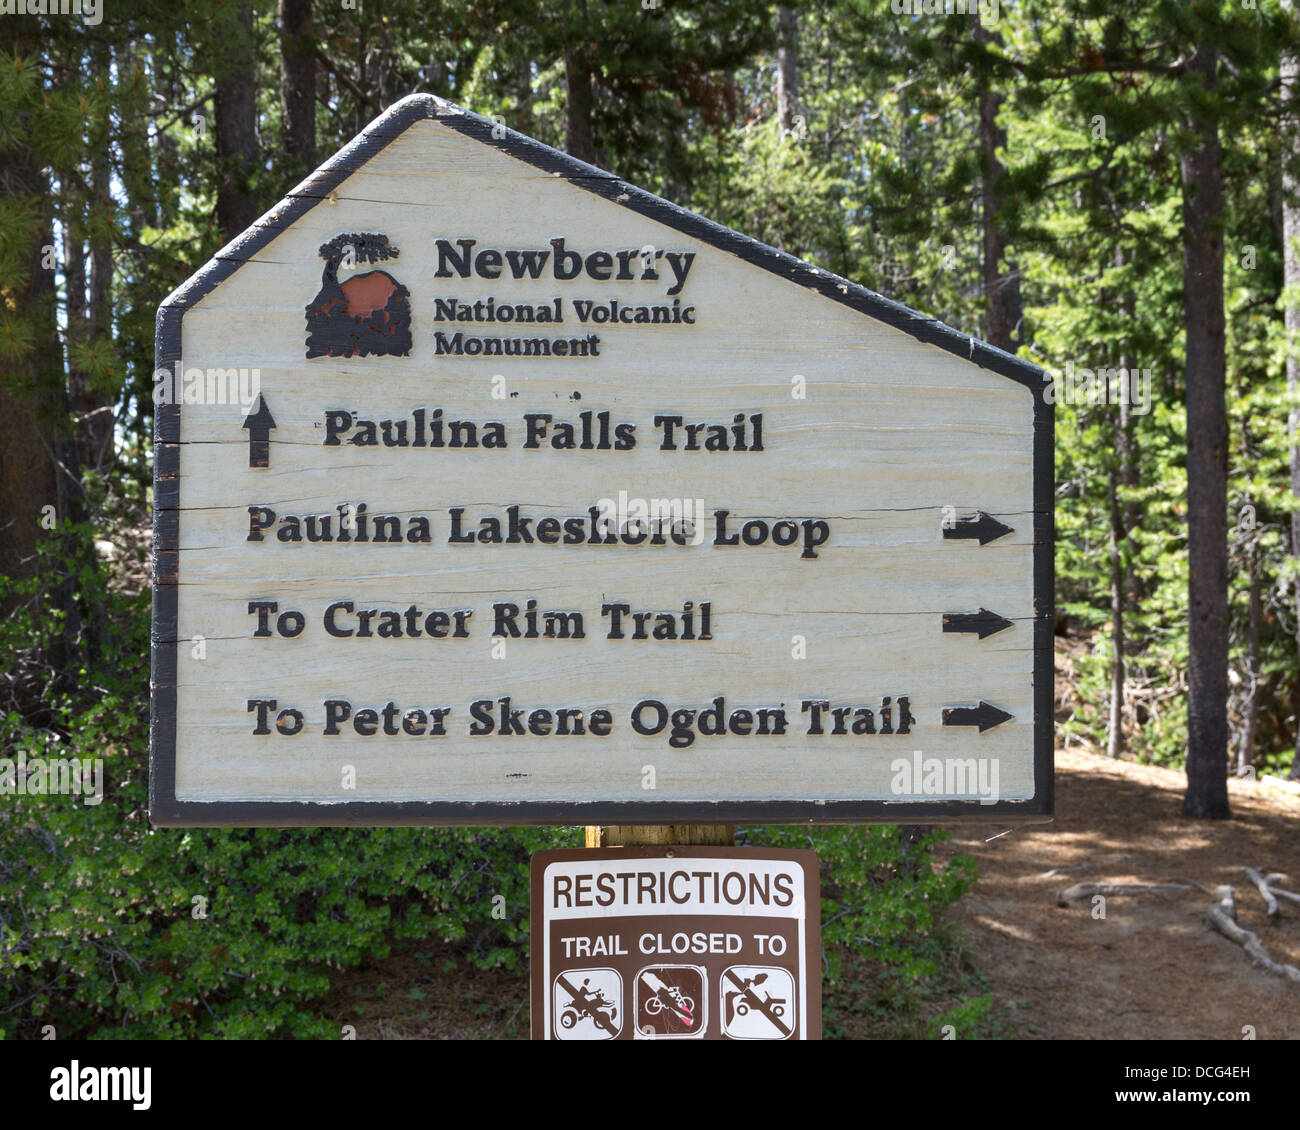 Oregon Newberry National Volcanic Monument trail directional sign Stock Photo